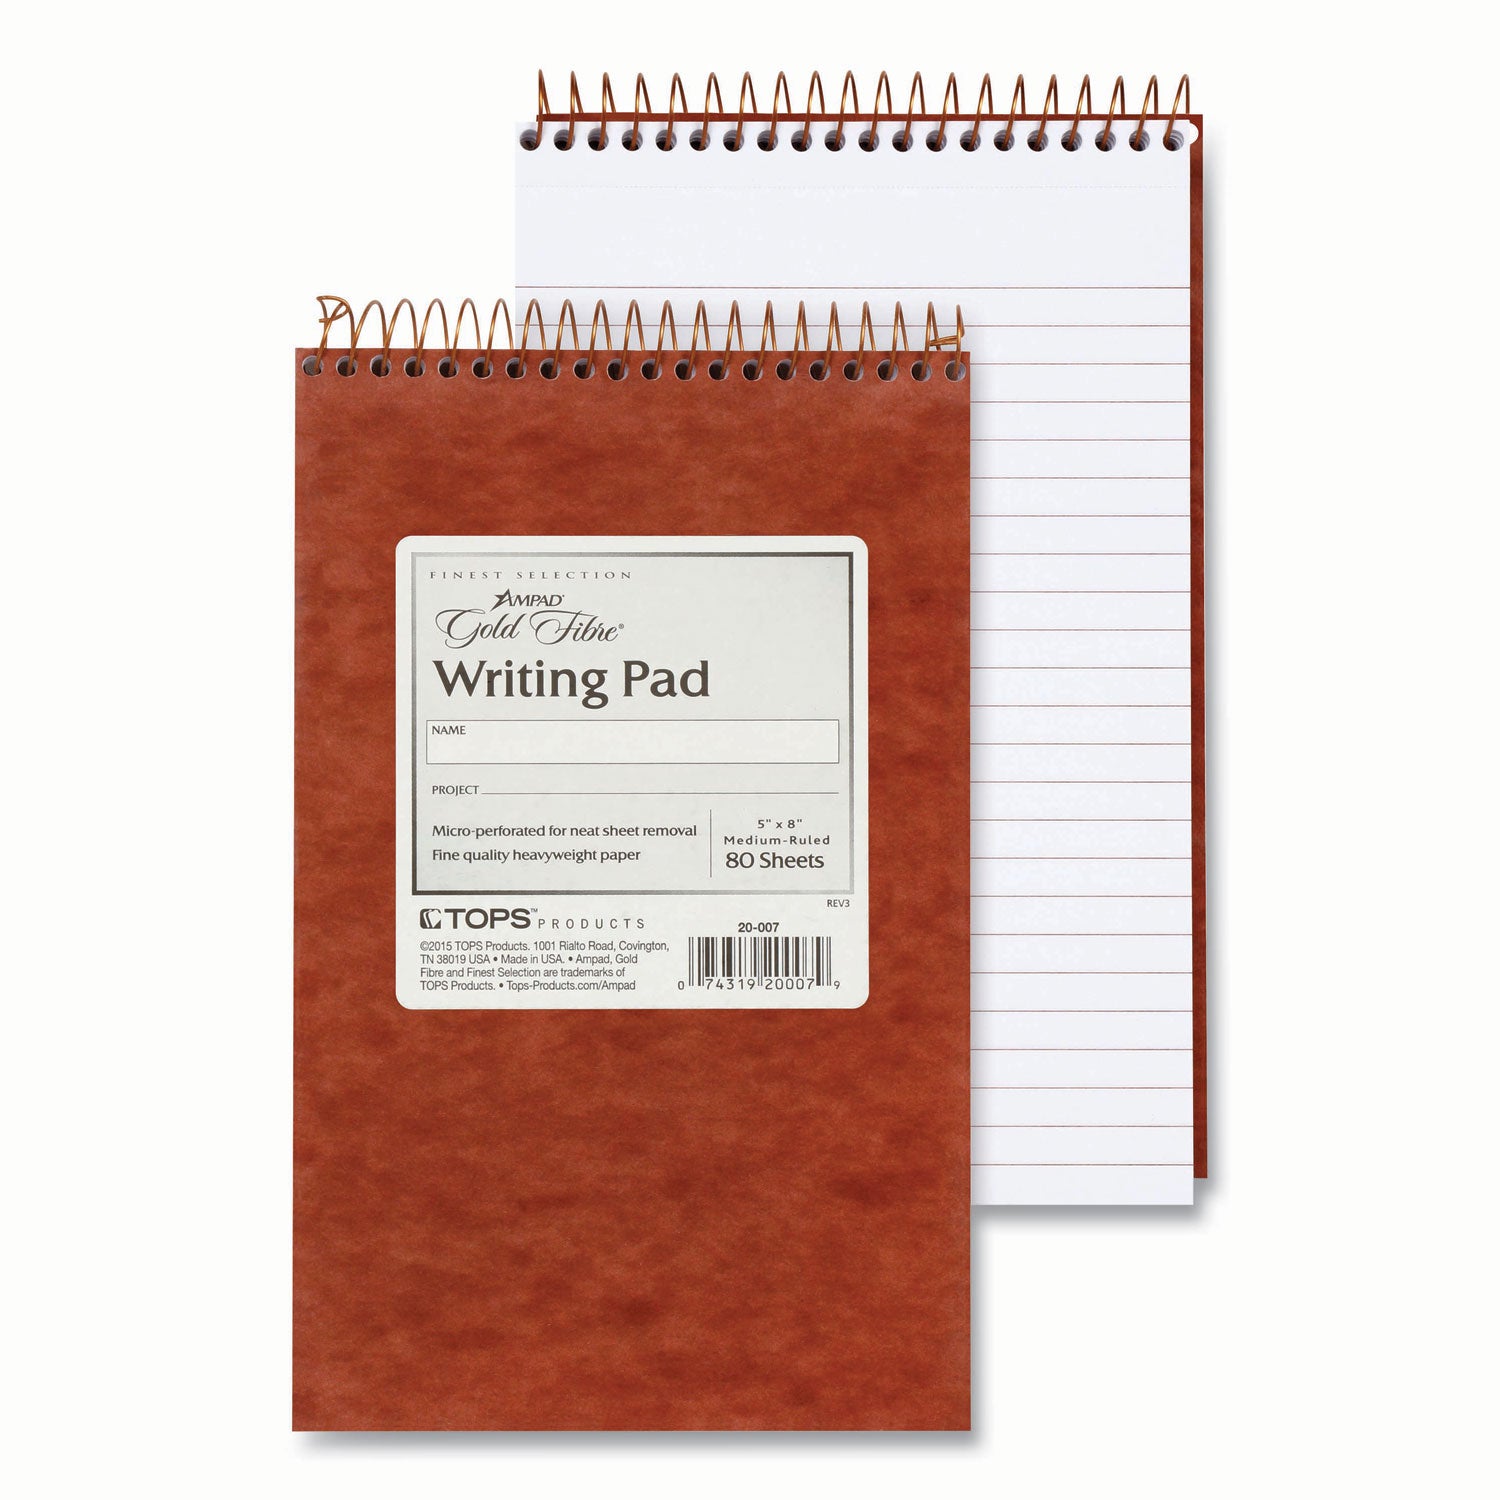 Gold Fibre Retro Wirebound Writing Pads, Medium/College Rule, Red Cover, 80 White 5 x 8 Sheets - 